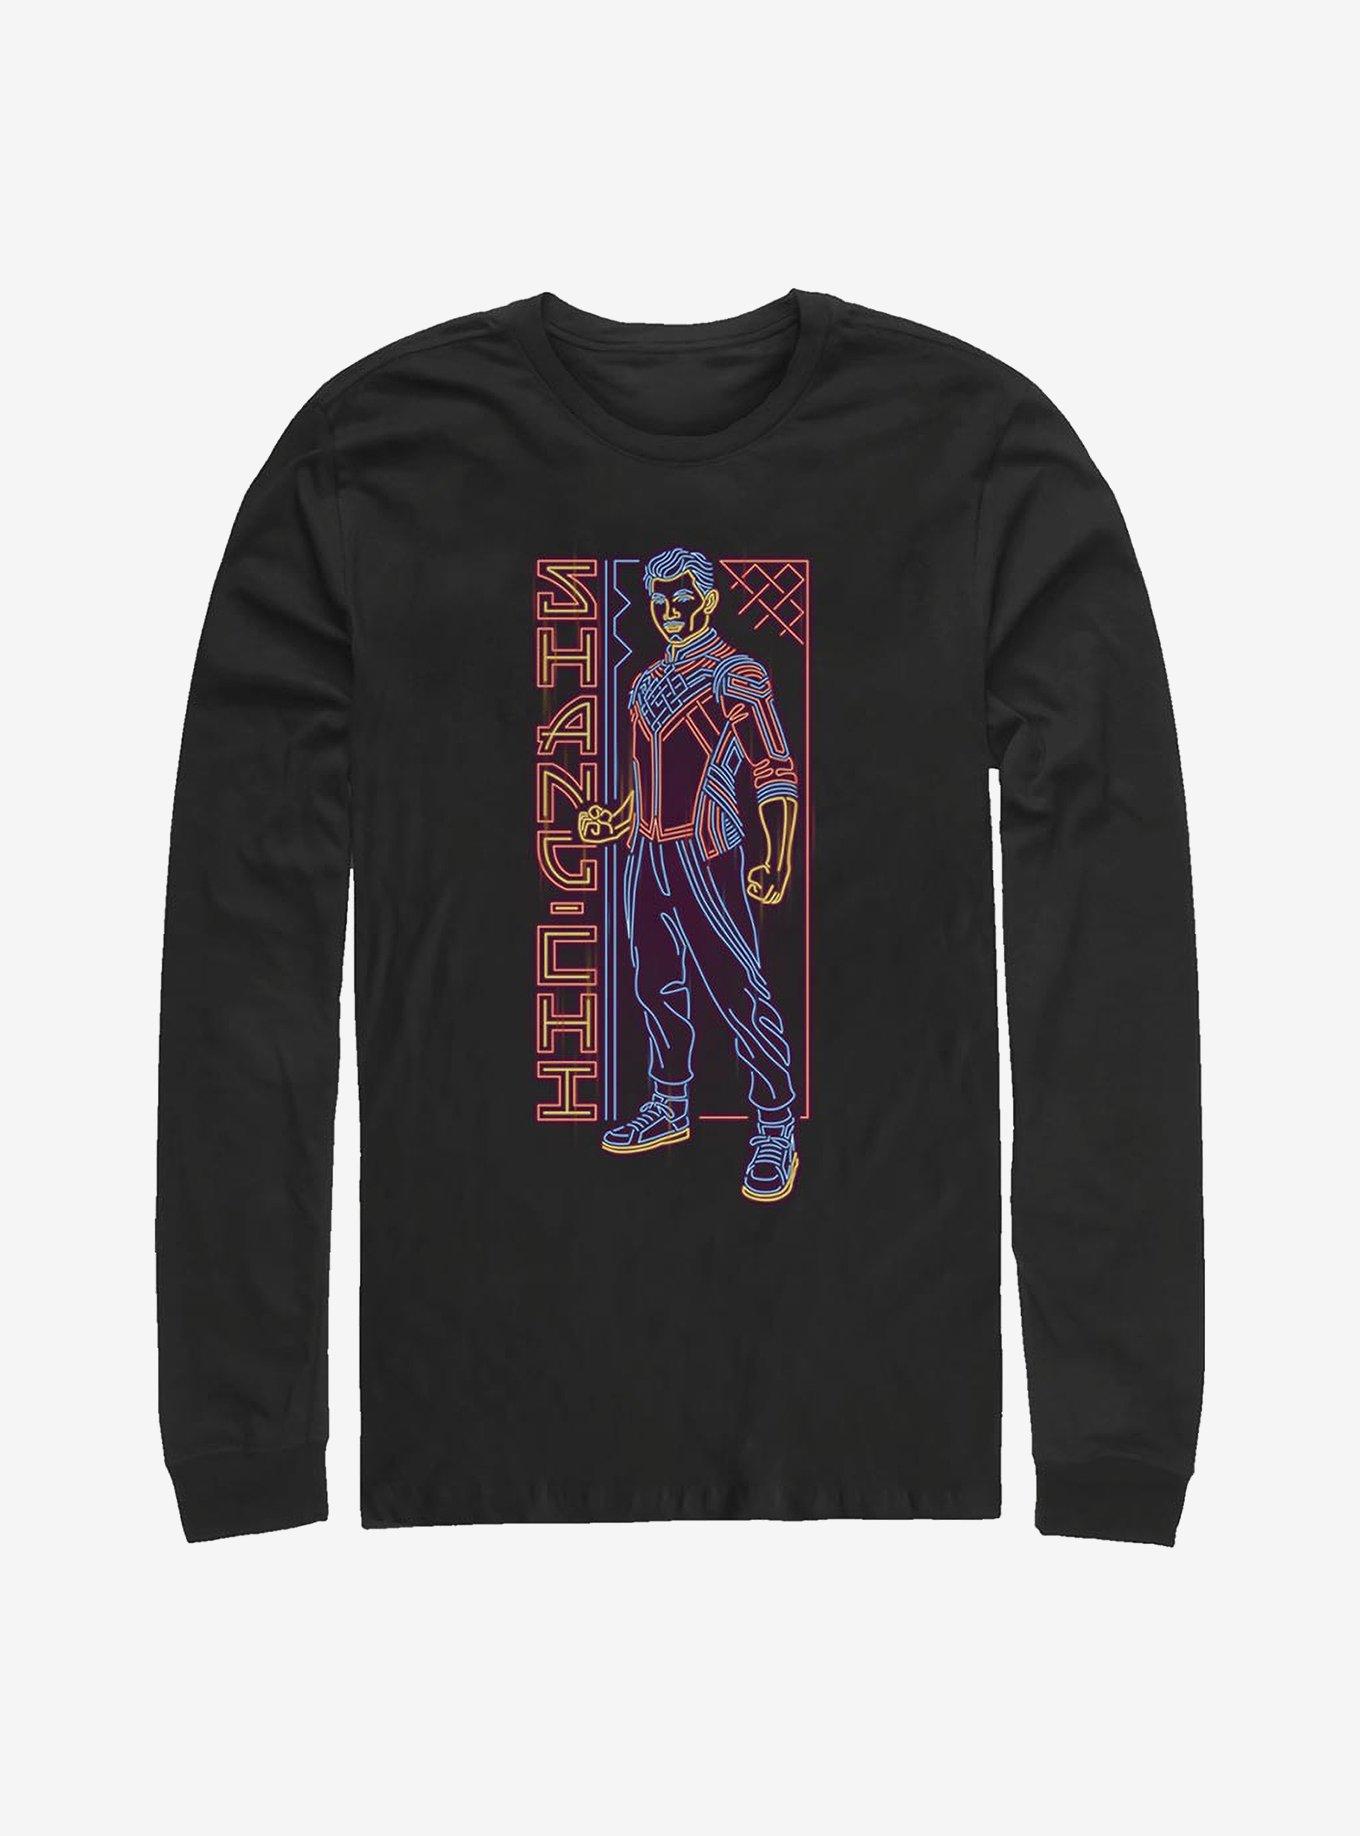 Marvel Shang-Chi And The Legend Of The Ten Rings Shang-Chi Long-Sleeve T-Shirt, BLACK, hi-res